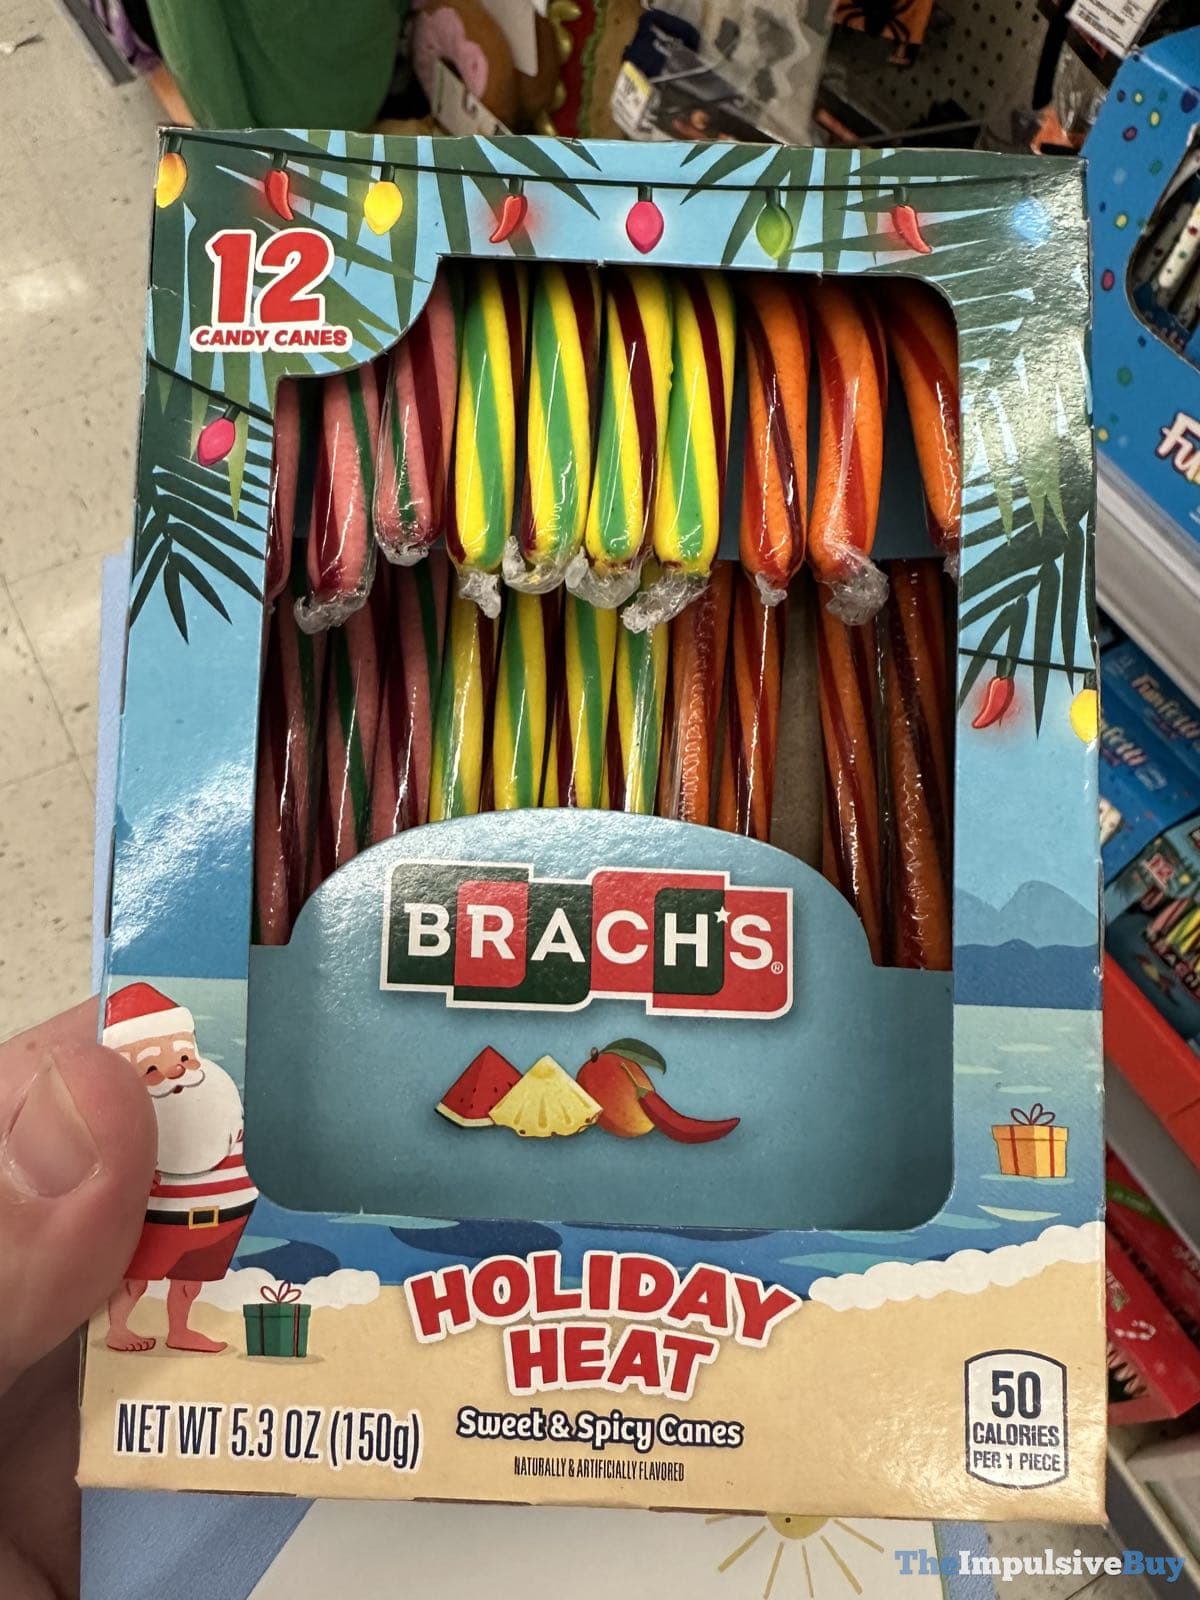 Brach's Just Released New Funfetti Candy Canes